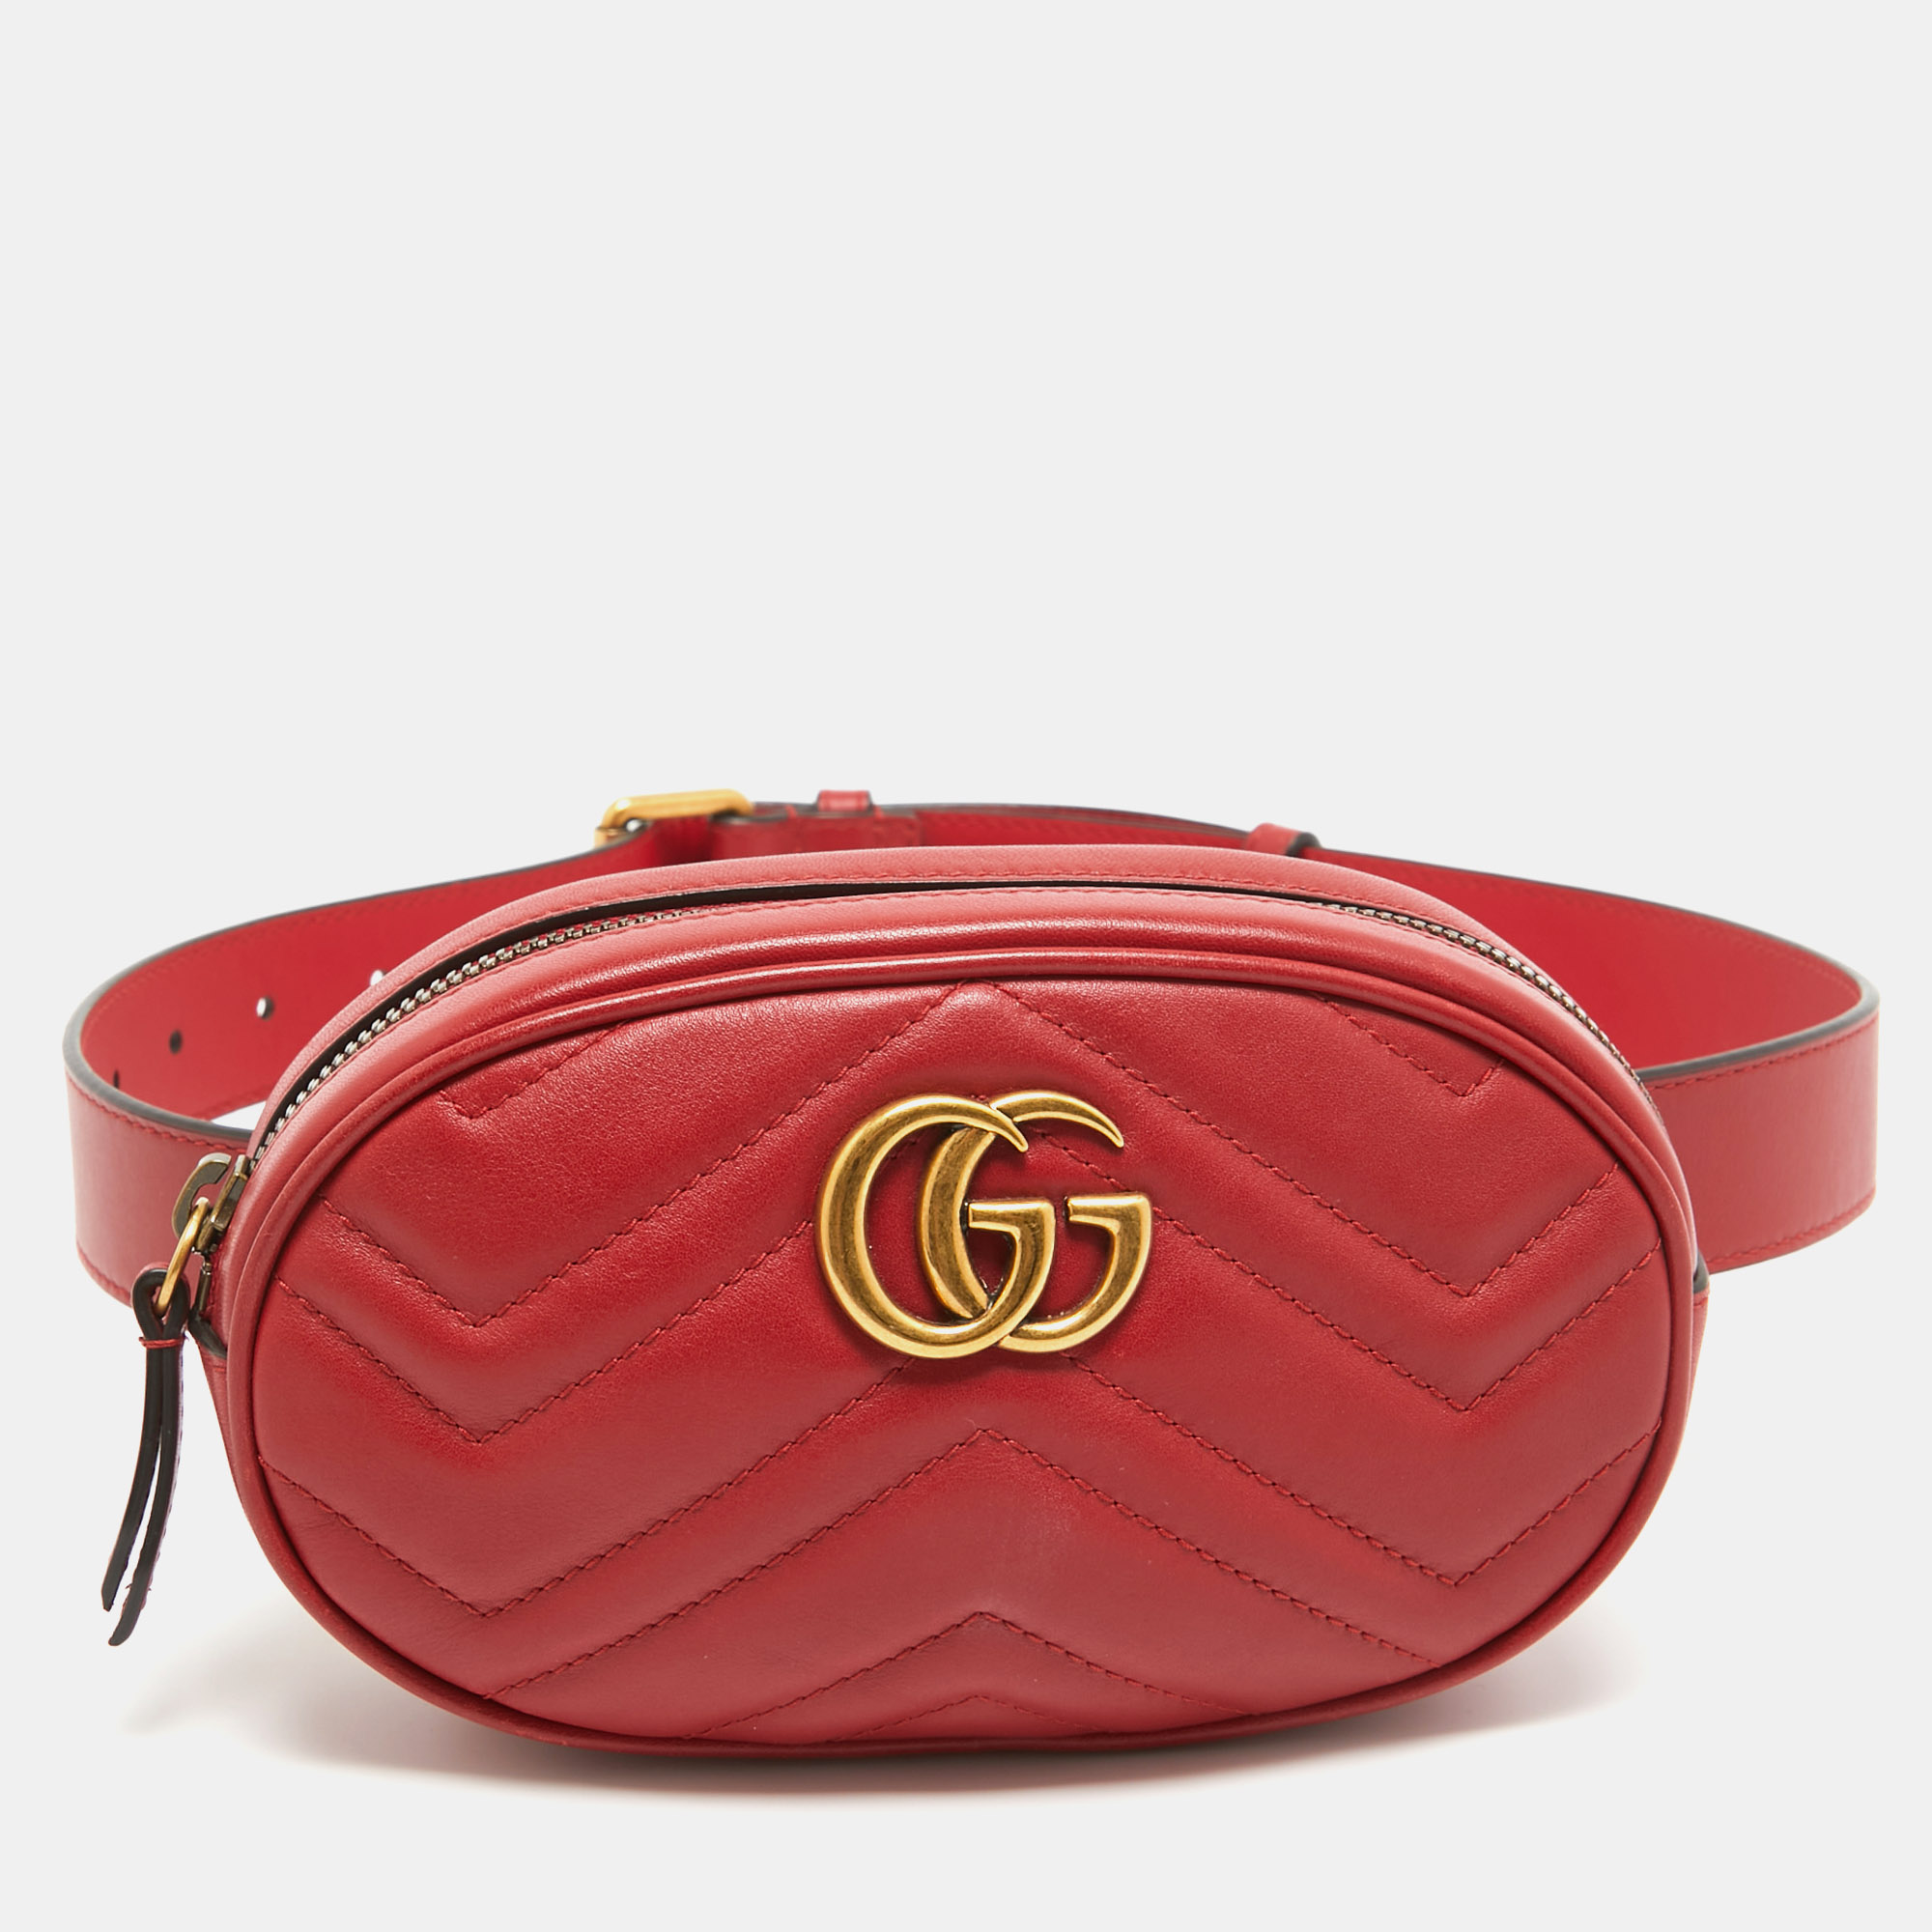 Pre-owned Gucci Red Matelassé Leather Gg Marmont Belt Bag